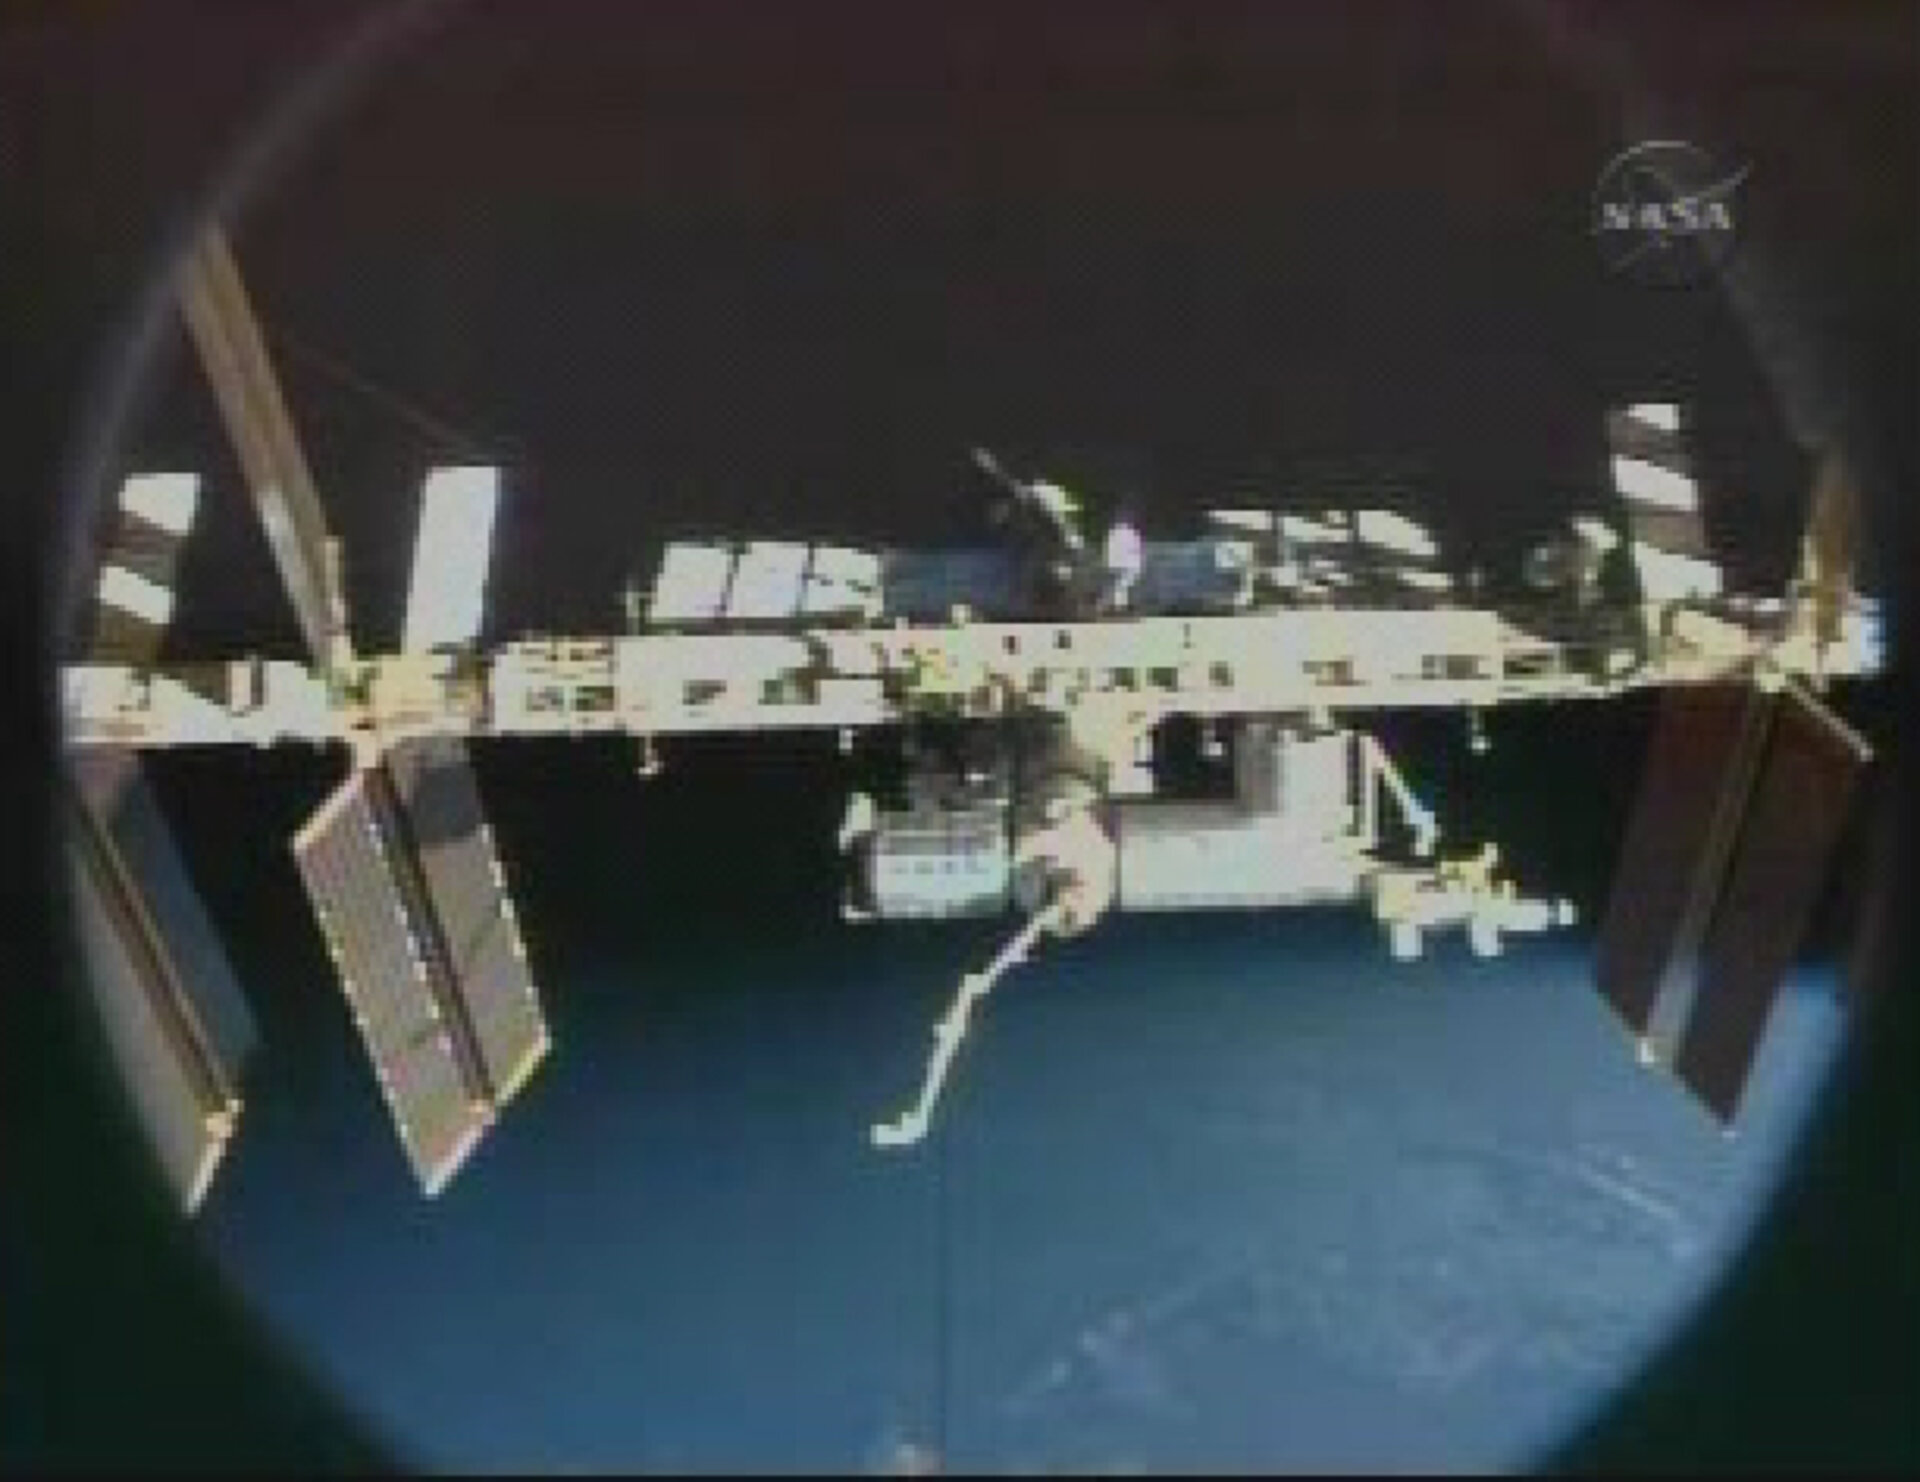 View of the International Space Station following undocking of Discovery